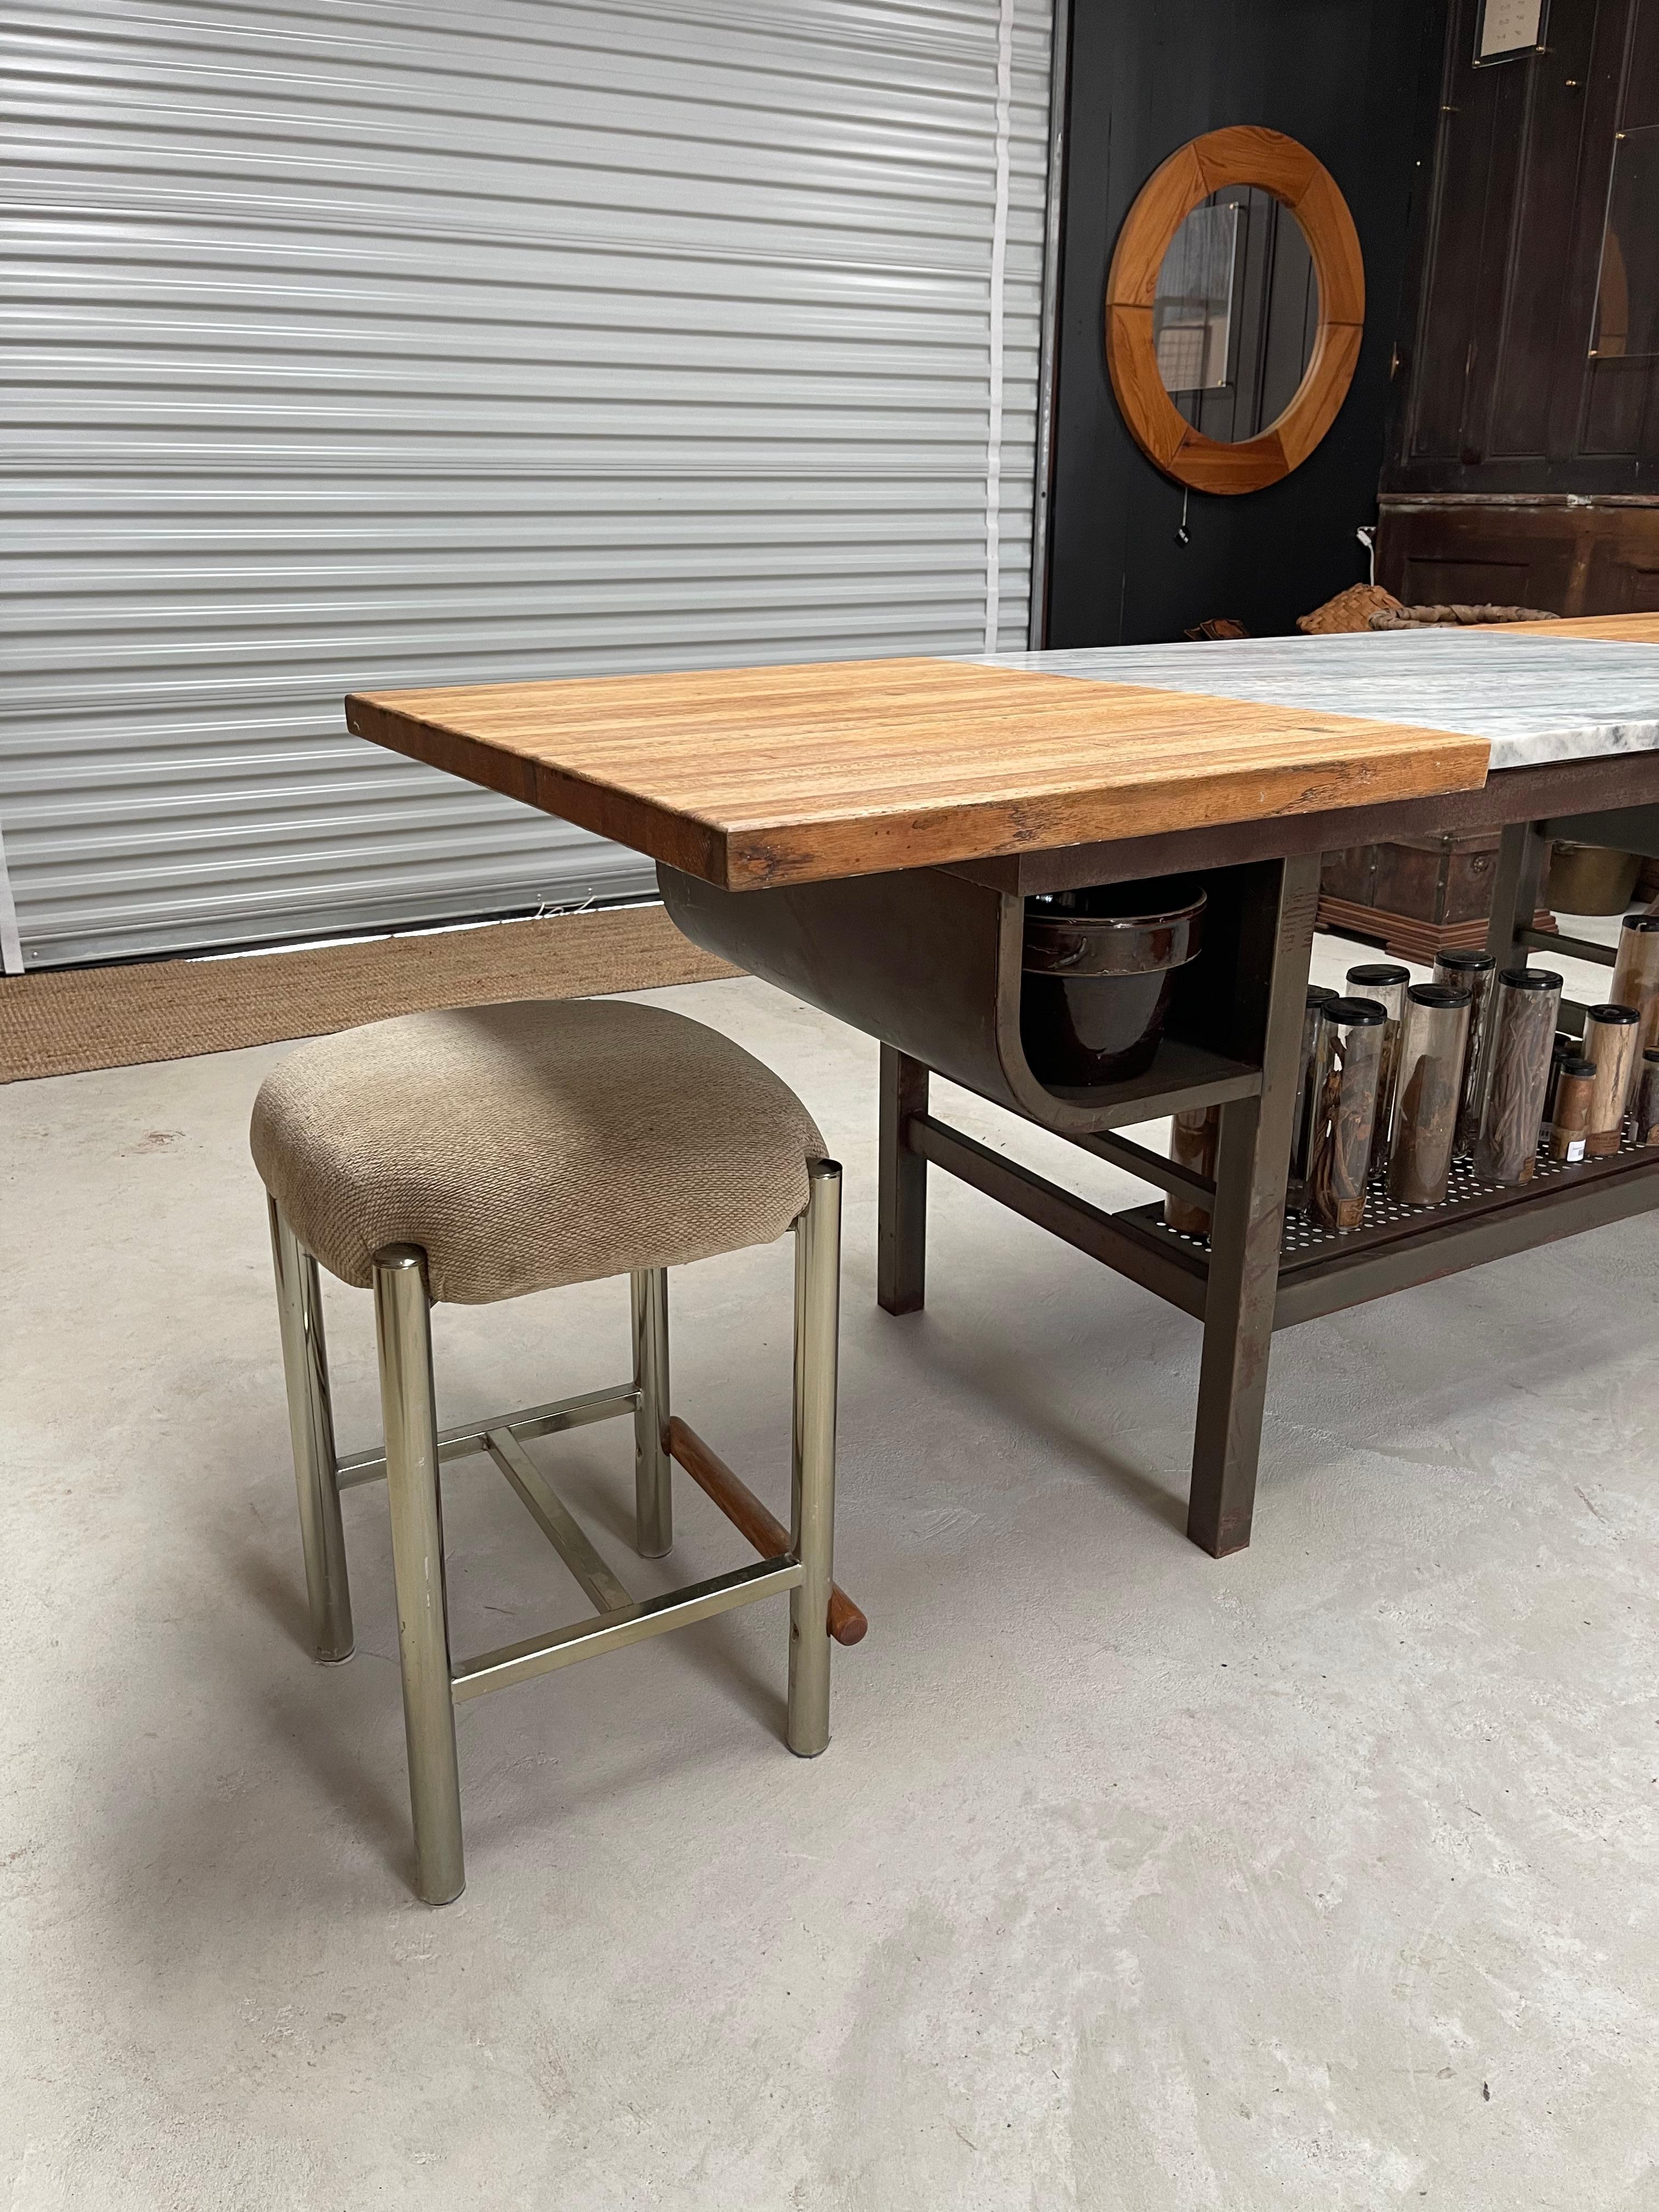 20th Century Industrial Mid Century Oak Butcher Block/Marble Island Work Table For Sale